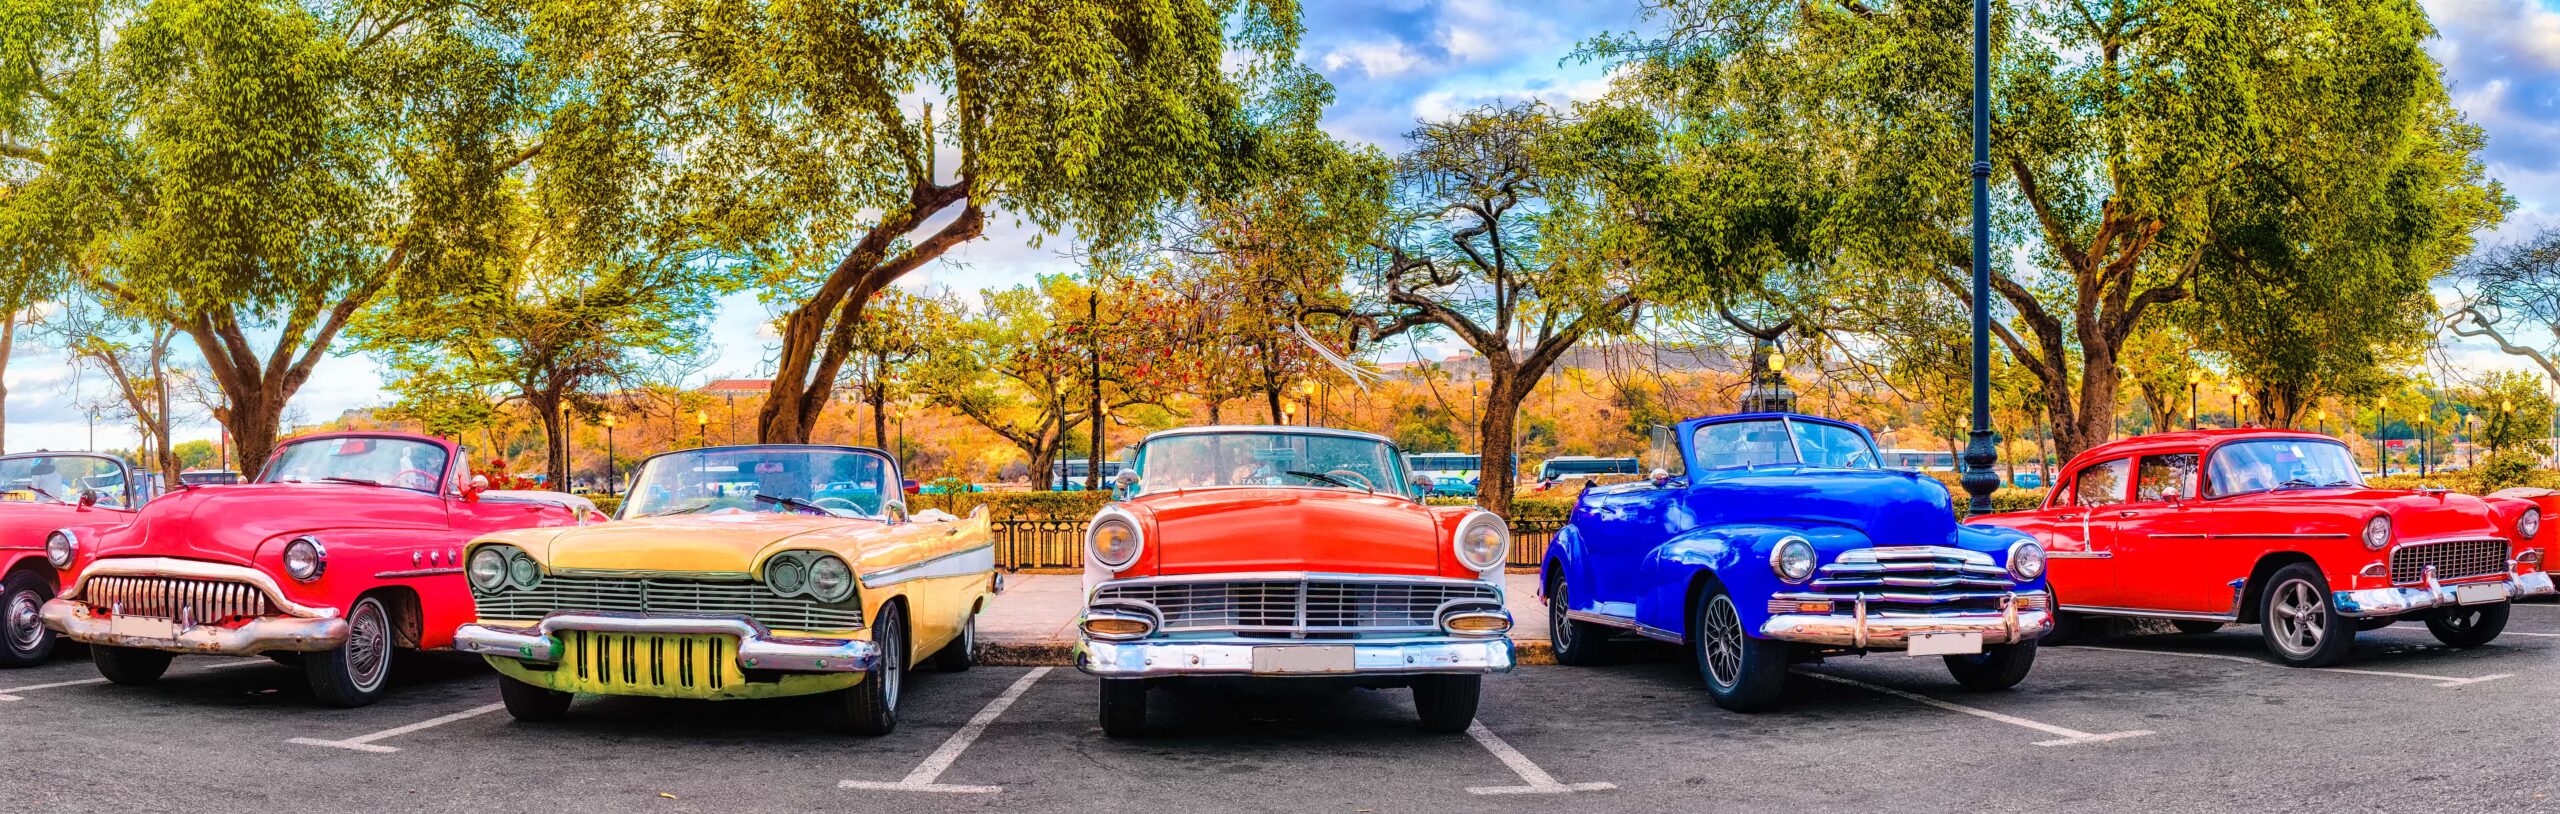 a row of older classic cars parked side-by-side in a parking lot with a tree line in the background